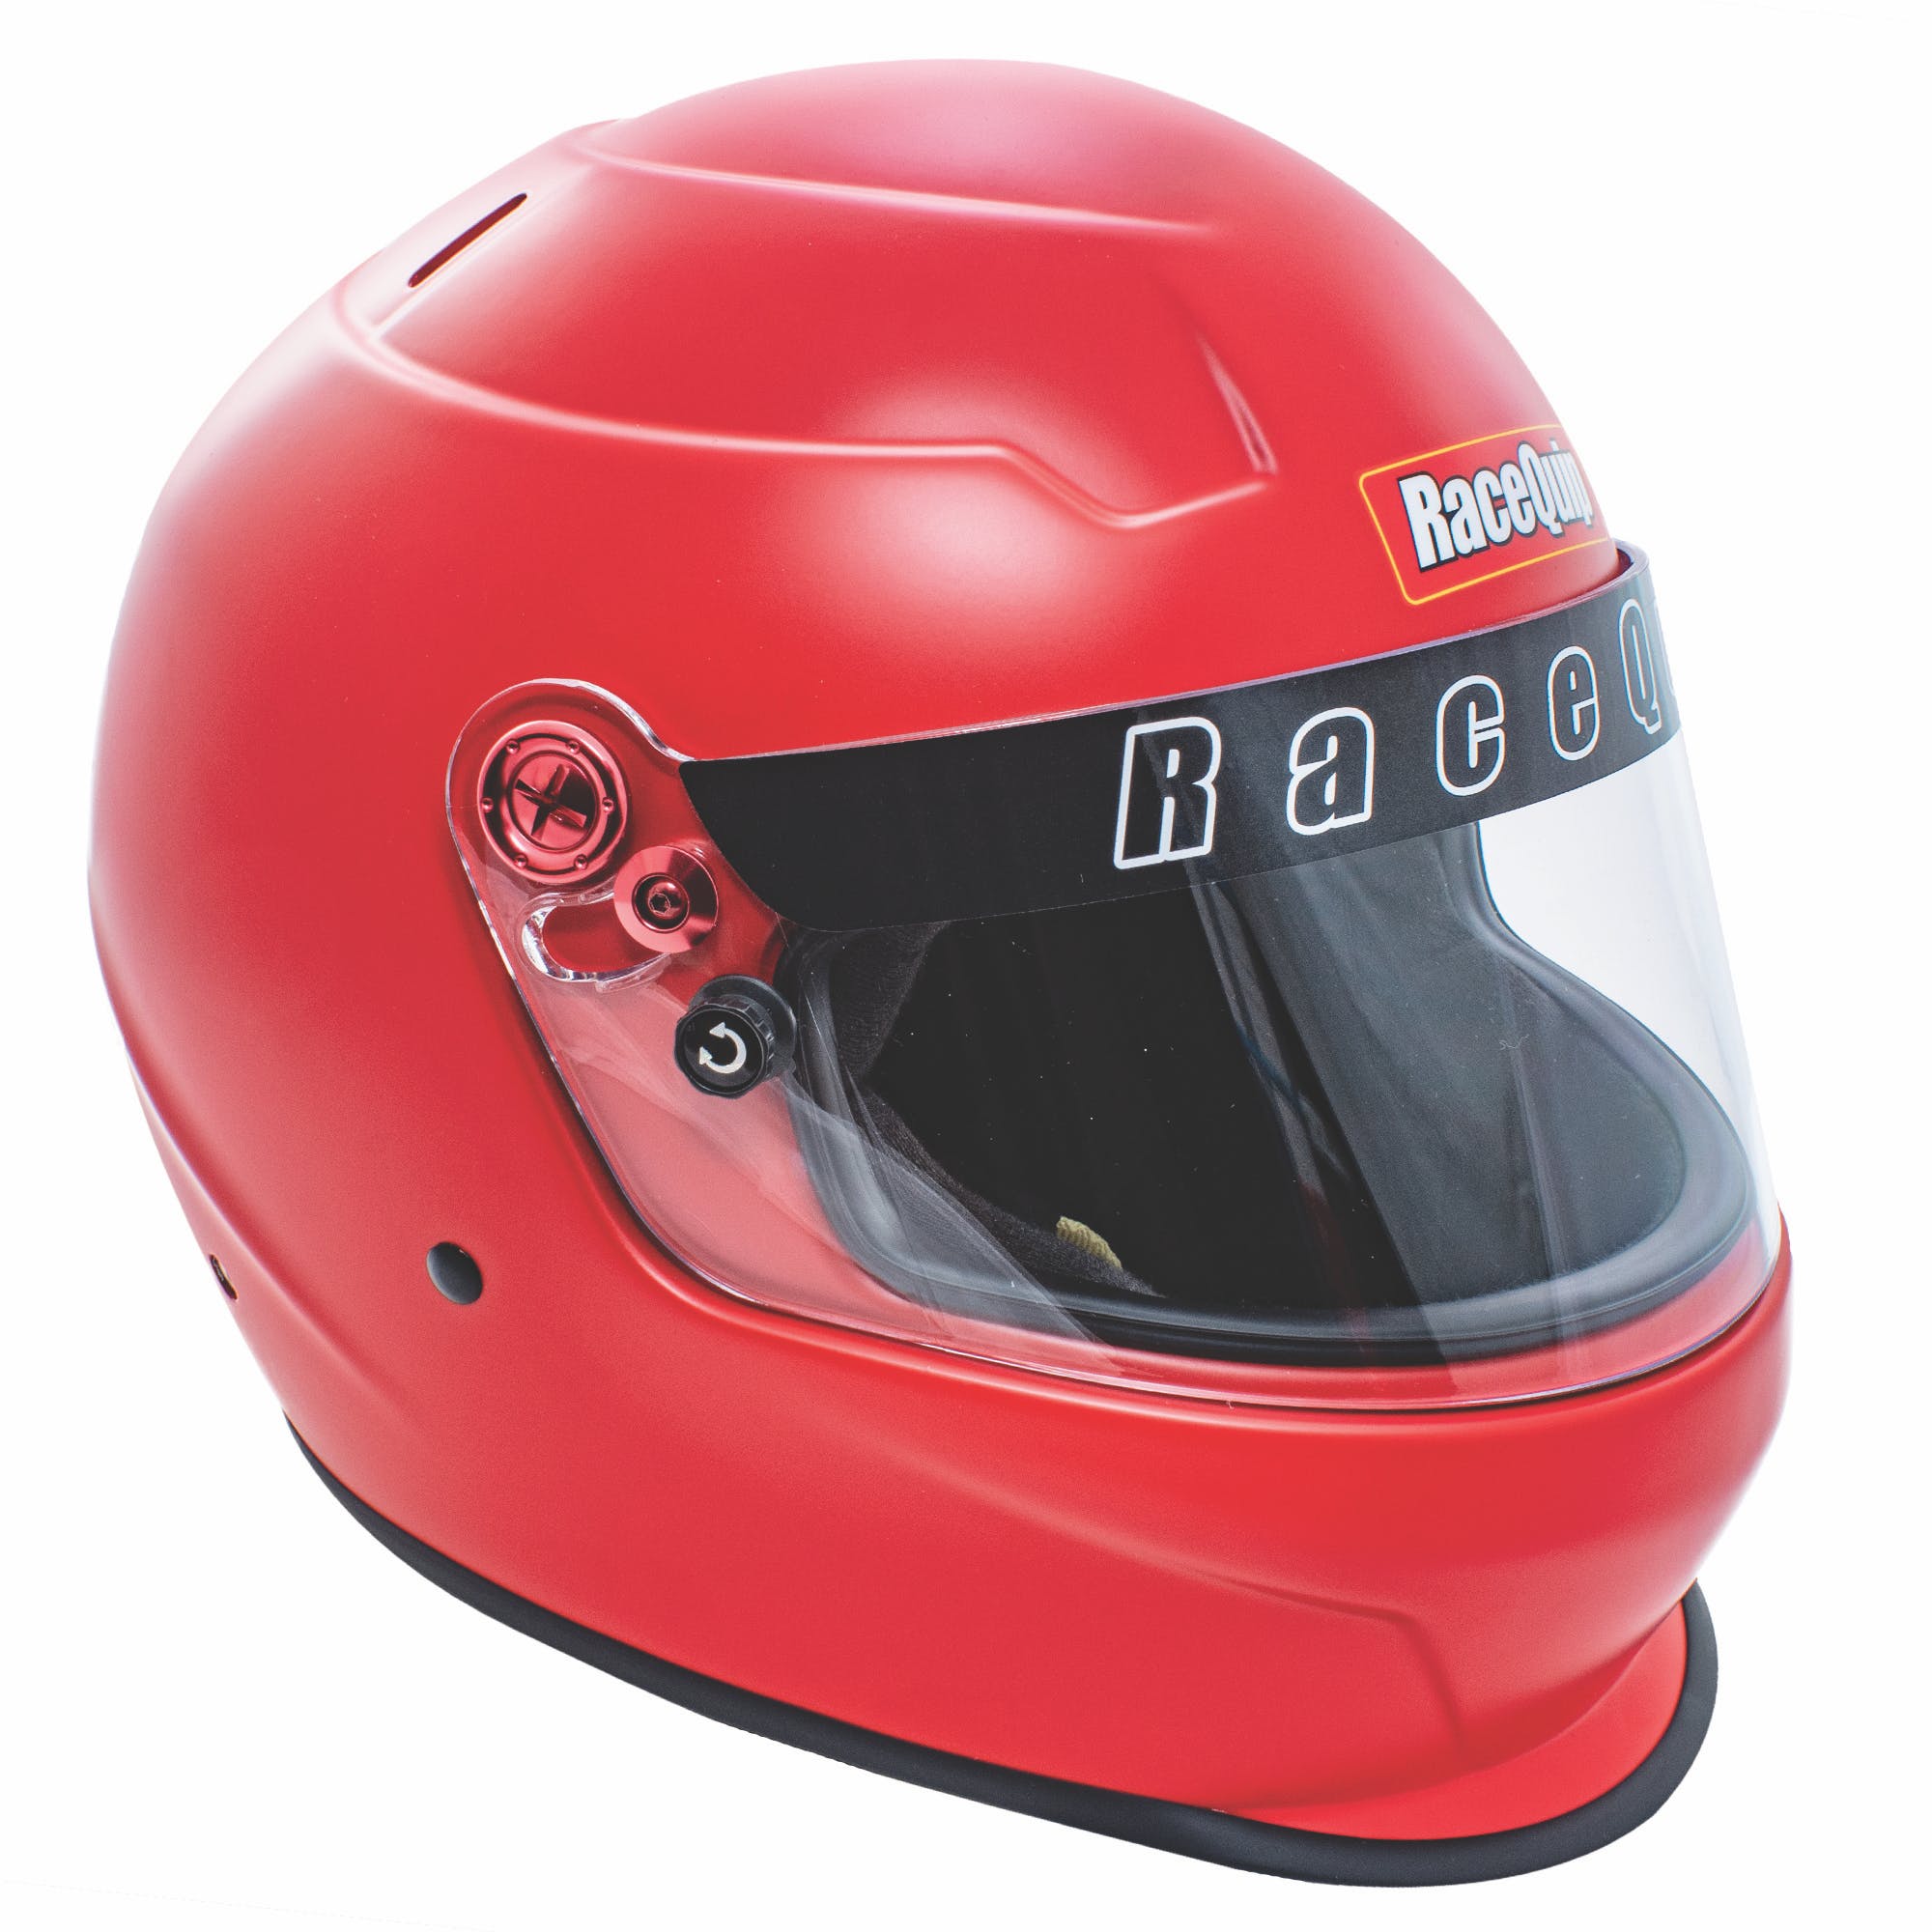 RaceQuip 276916 PRO20 Full Face Helmet Snell SA2020 Rated; Corsa Red X-Large